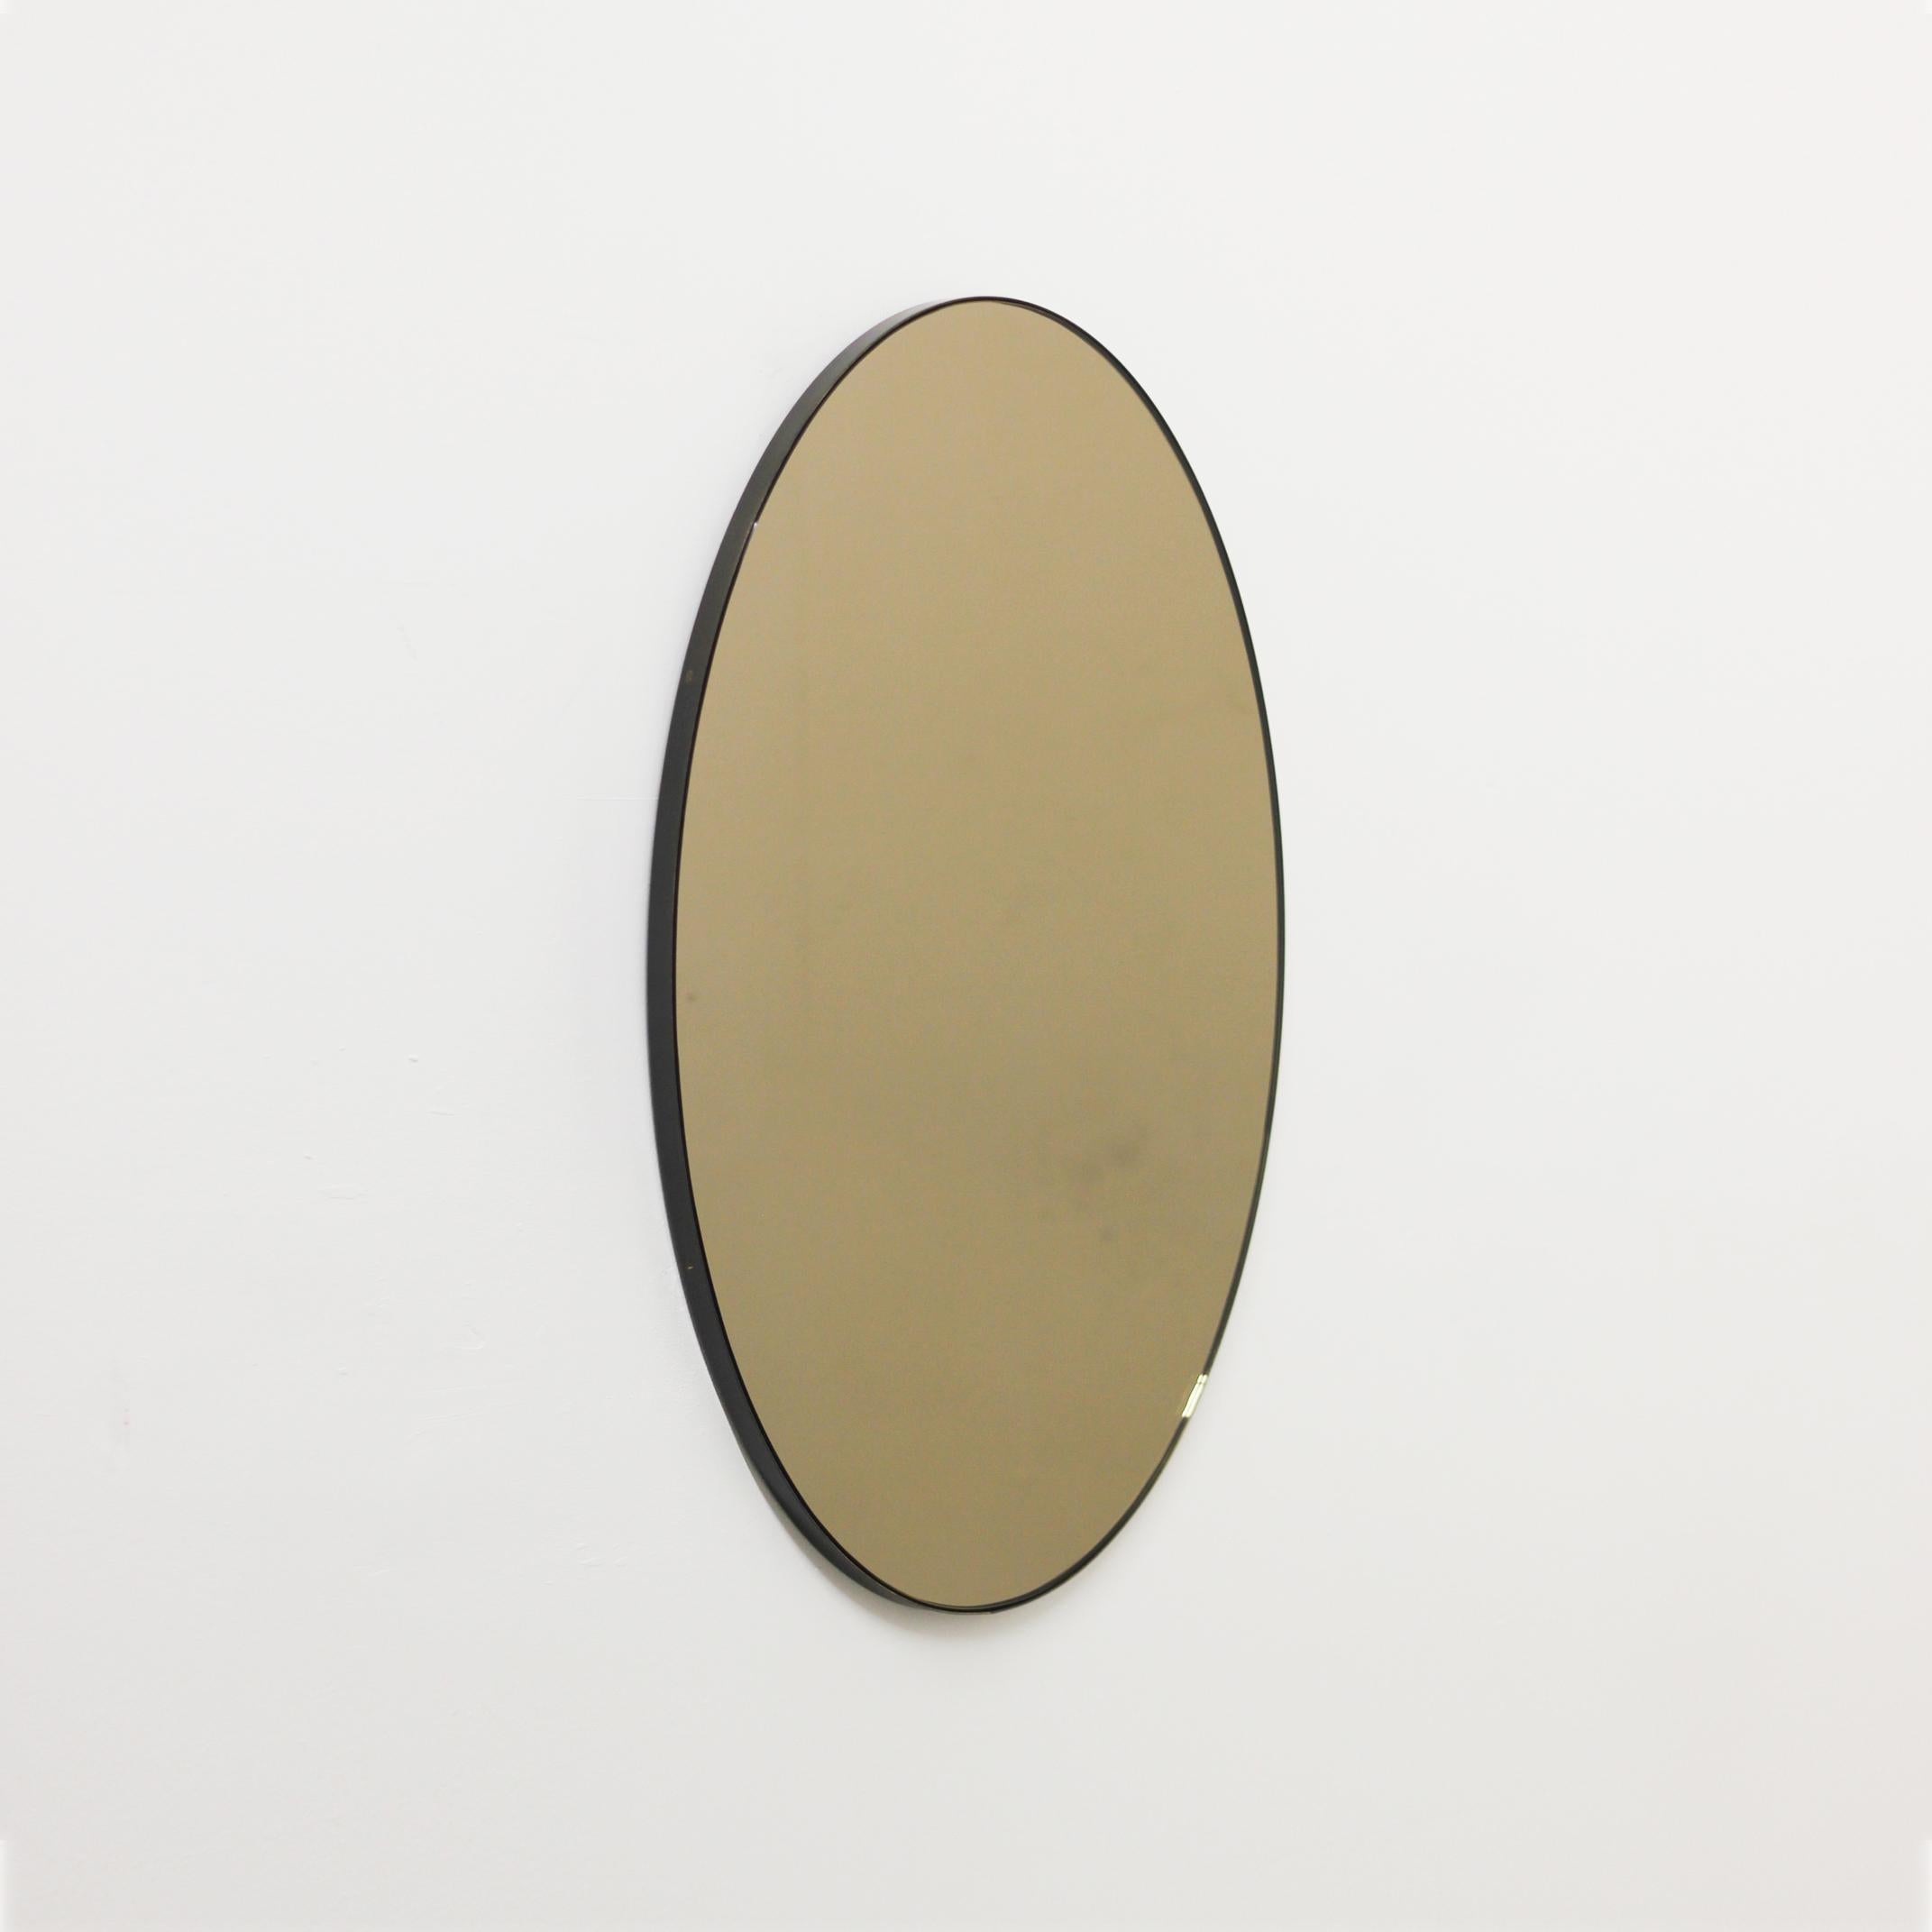 Contemporary oval bronze tinted mirror with an elegant bronze patina brass frame. Designed and made in London, UK.

Our mirrors are designed with an integrated French cleat (split batten) system that ensures the mirror is securely mounted flush with